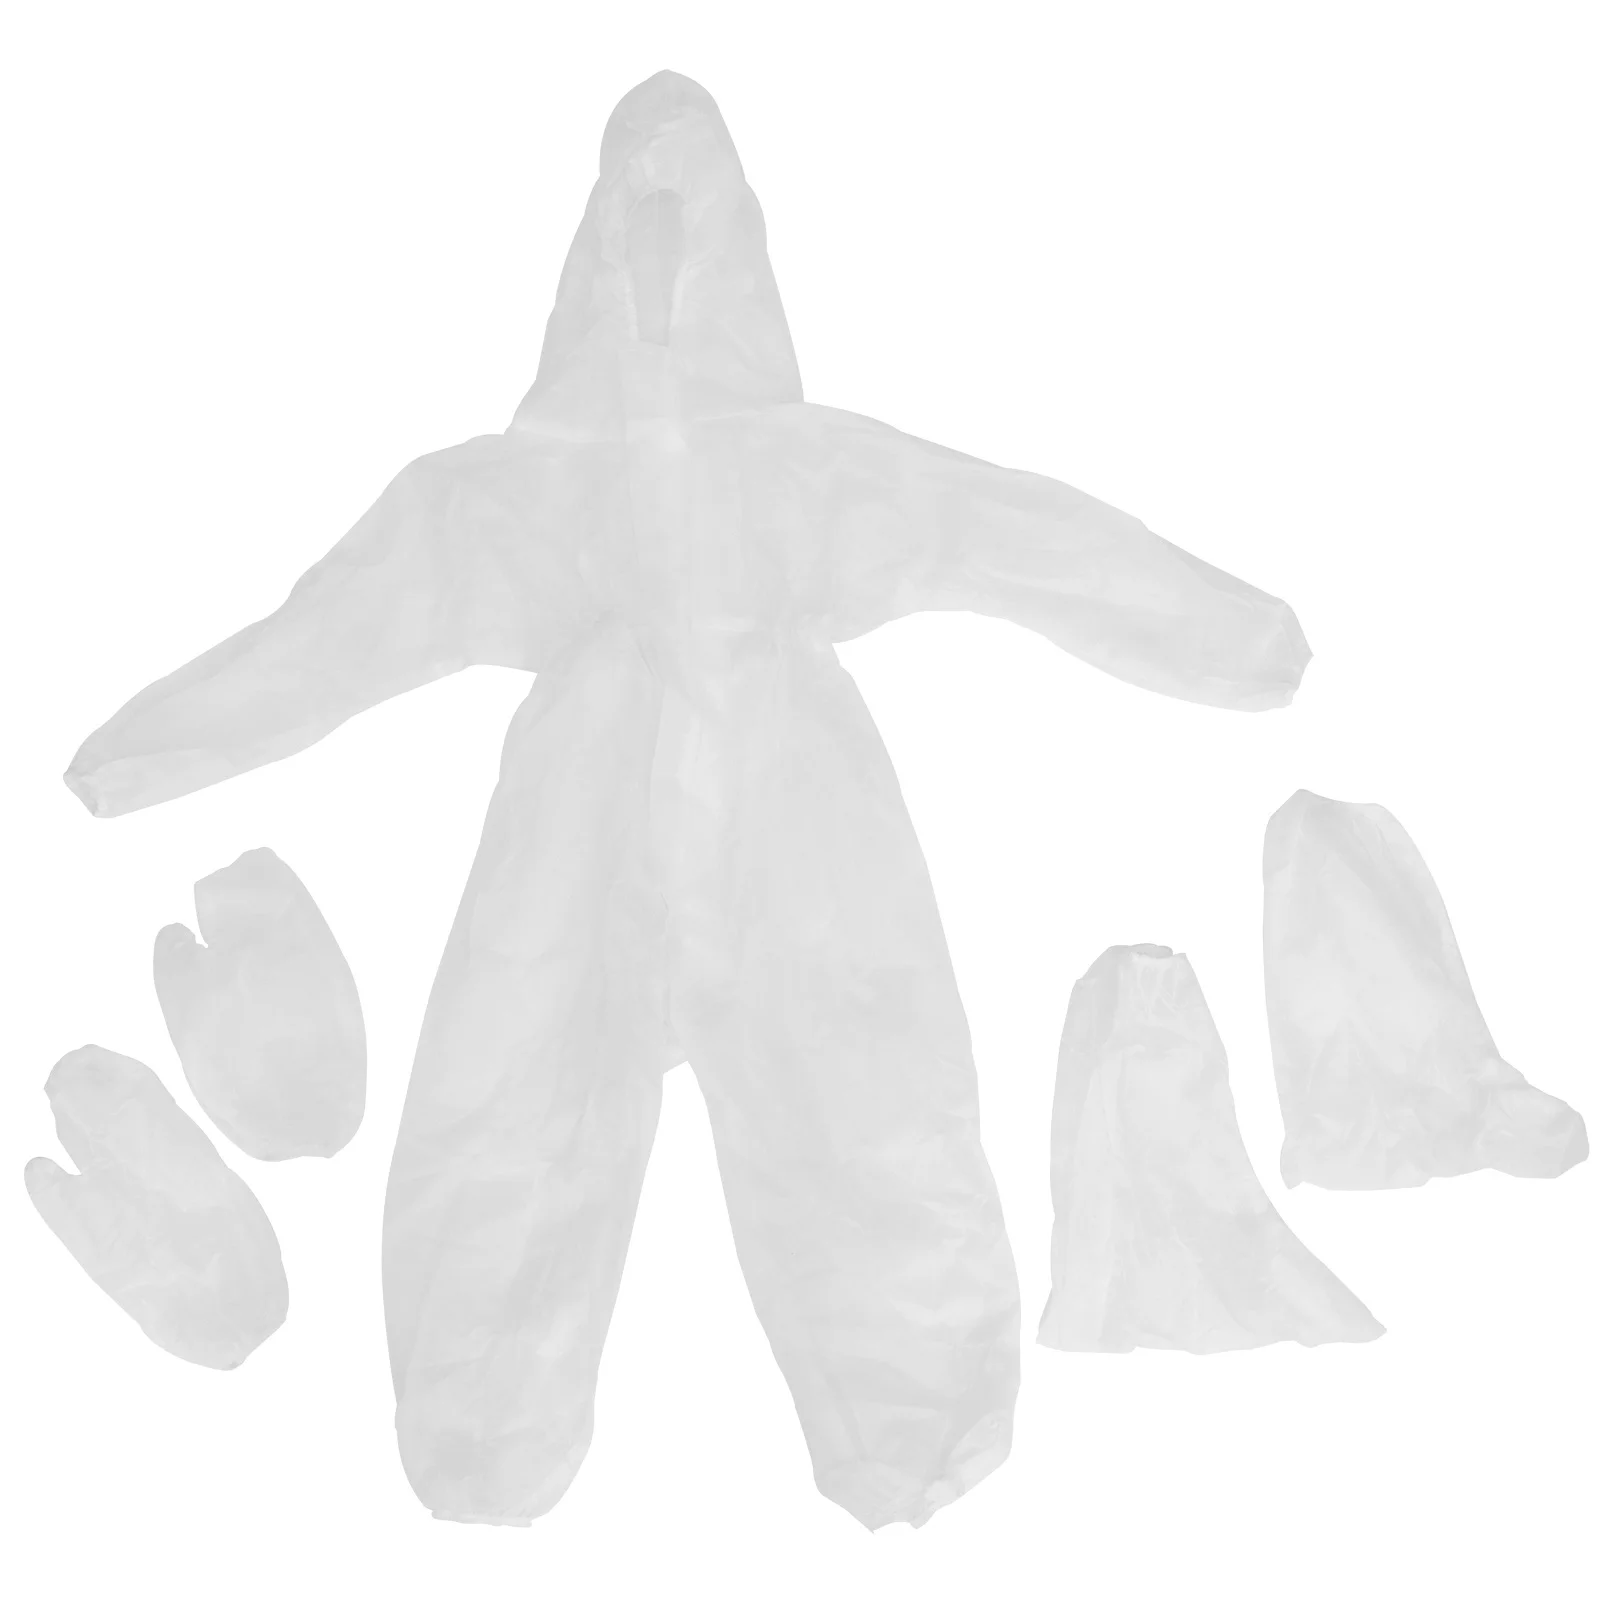 

Coveralls Suits Overalls Hooded Nonwoven Protection Body Suit Clothes for Kids Children Size